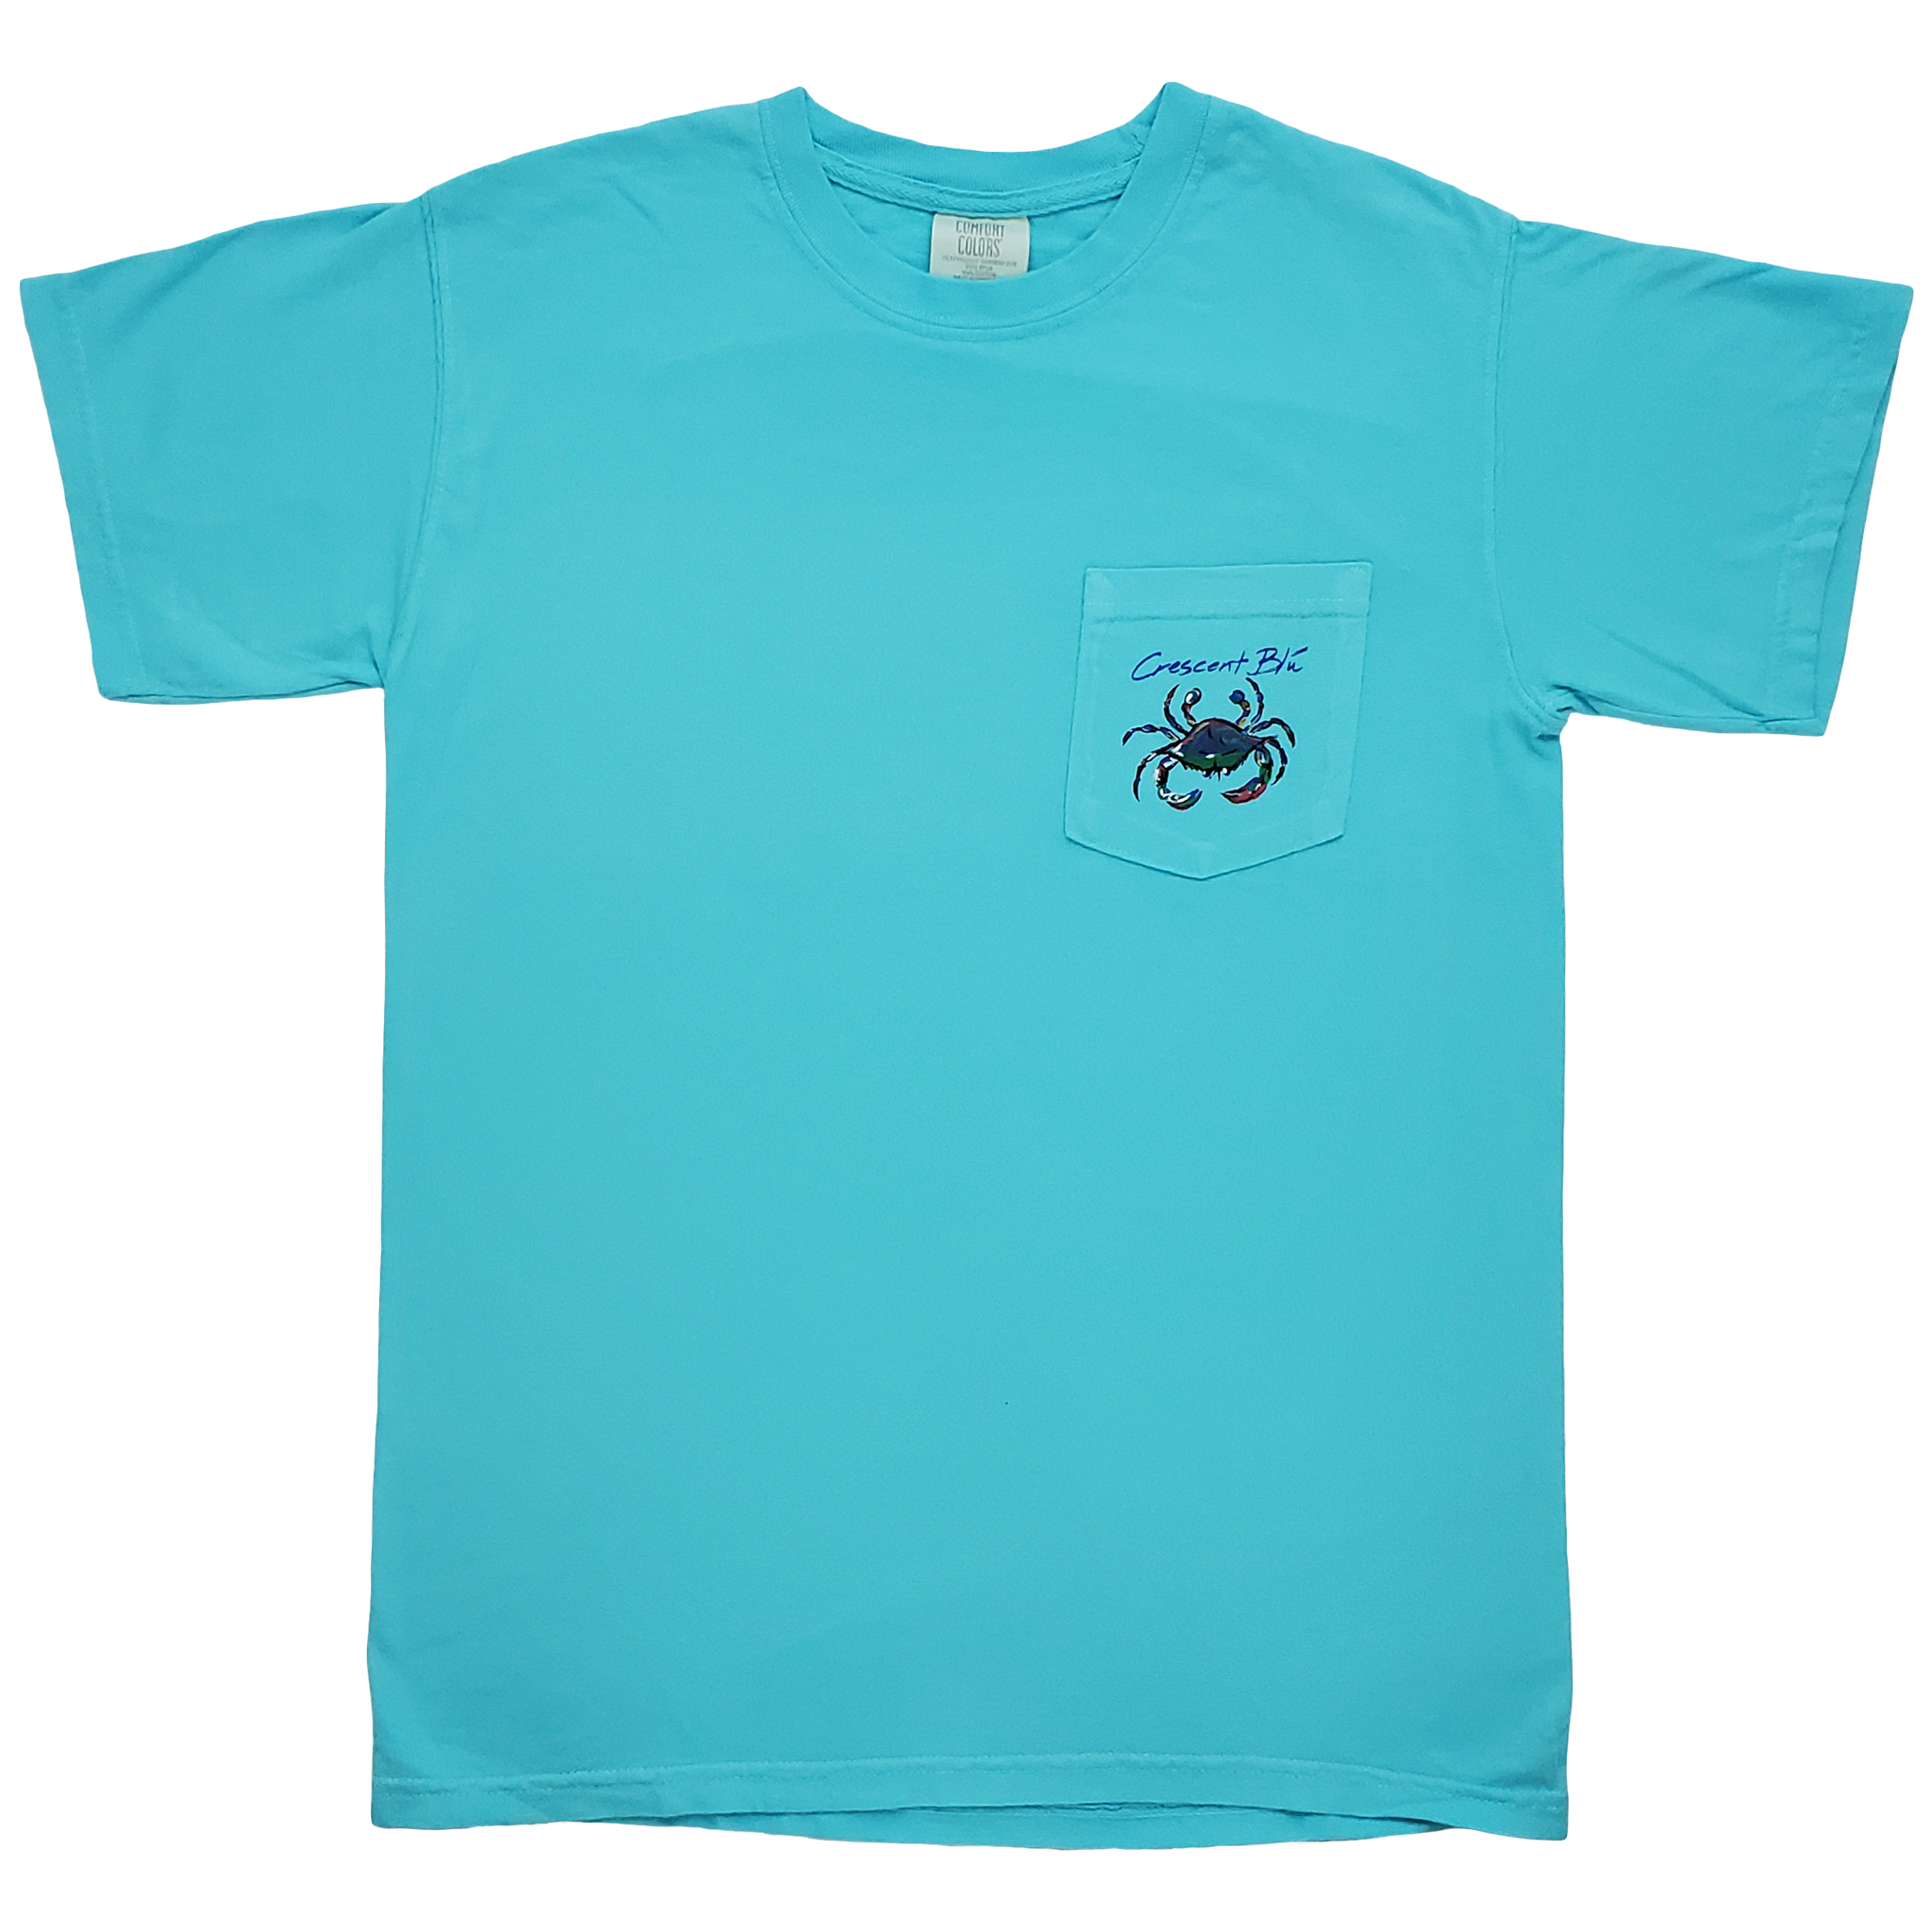 Front of Adult short sleeve Crescent Blu t-short in lagoon blue color with multi-colored crab from the Signature collection